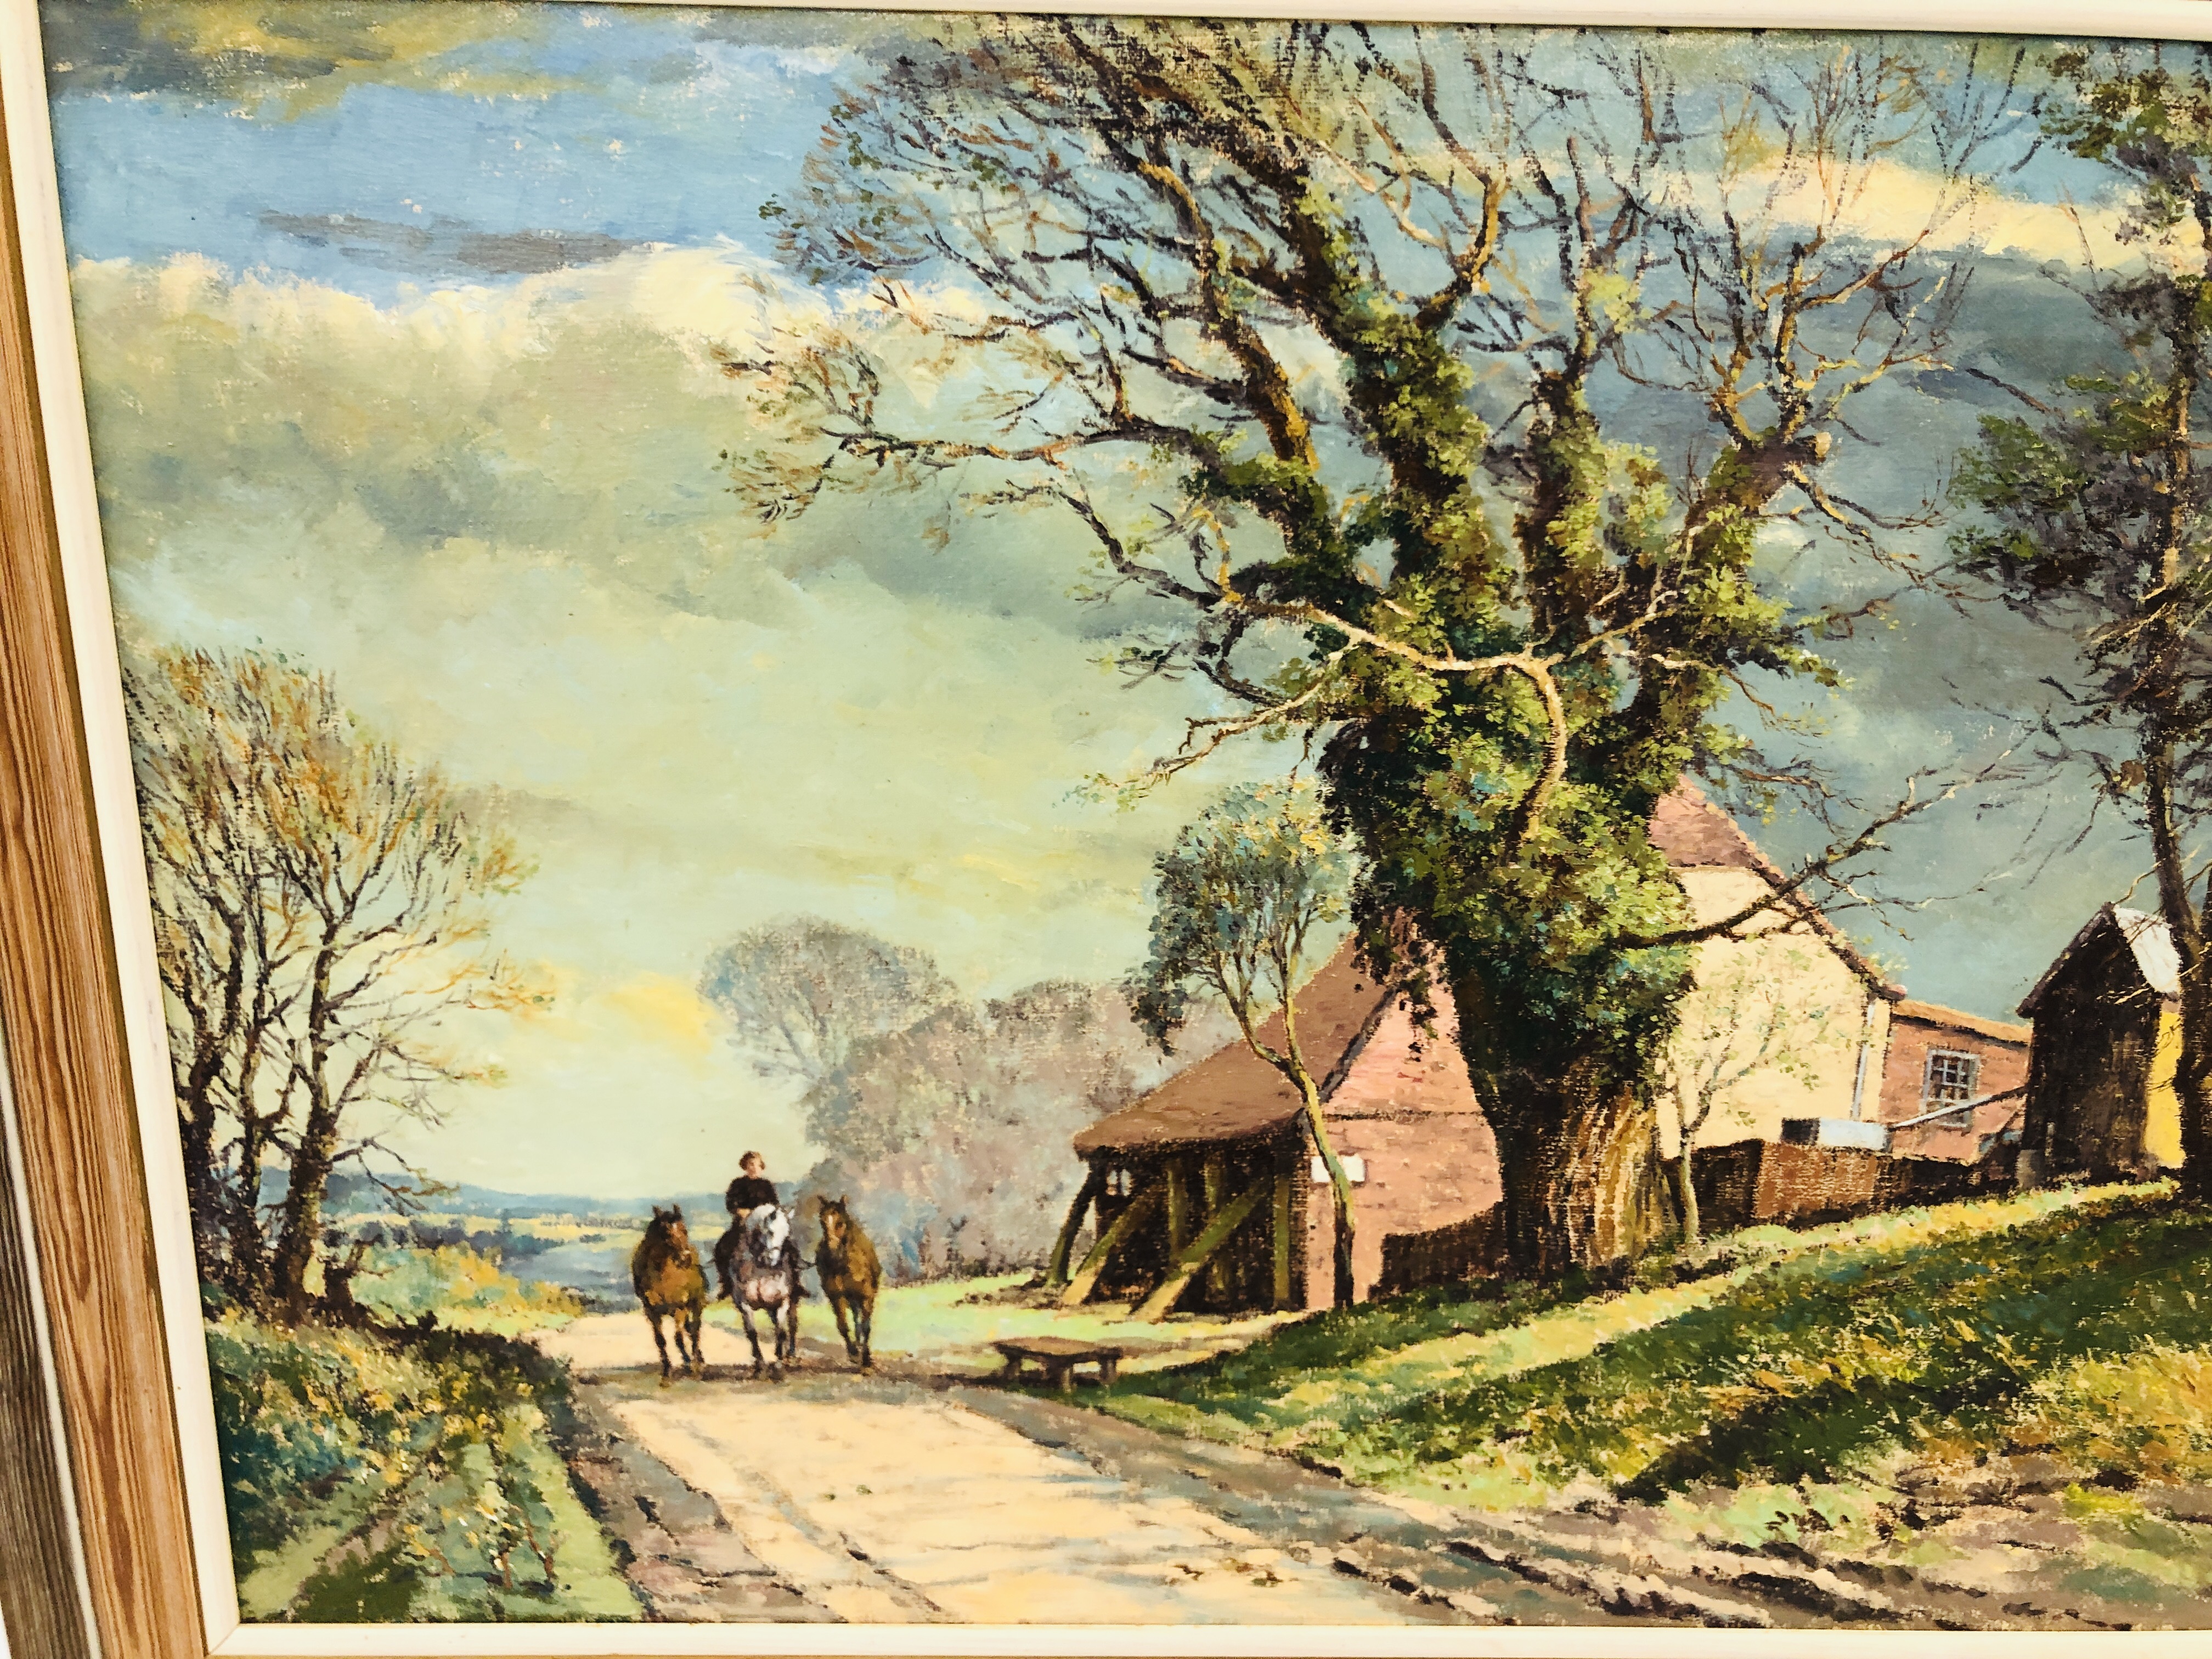 M. KAY "COUNTRY LANE WITH RIDER AND HORSES", OIL ON CANVAS 60 X 90CM. - Image 2 of 4